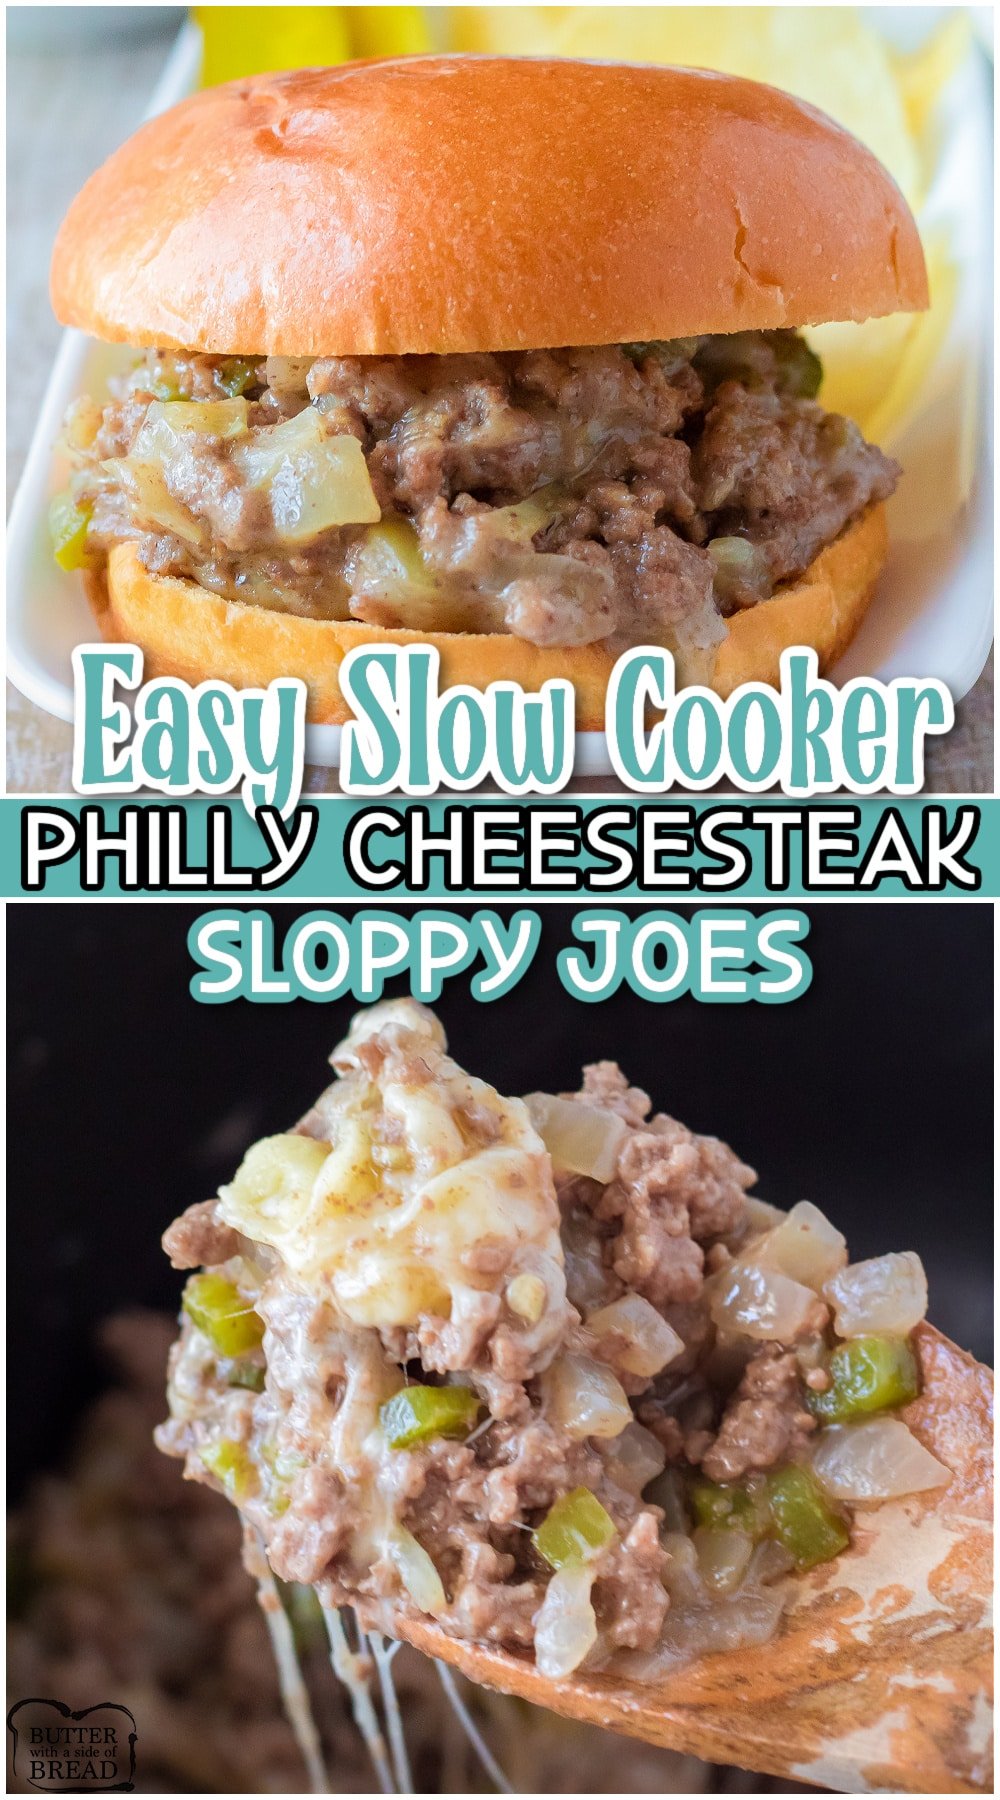 Slow Cooker Philly Cheesesteak Sloppy Joes are an epic mashup of two classic recipes! These philly cheesesteak sloppy joes are simple to make, loaded with gooey cheese, & have amazing flavor!